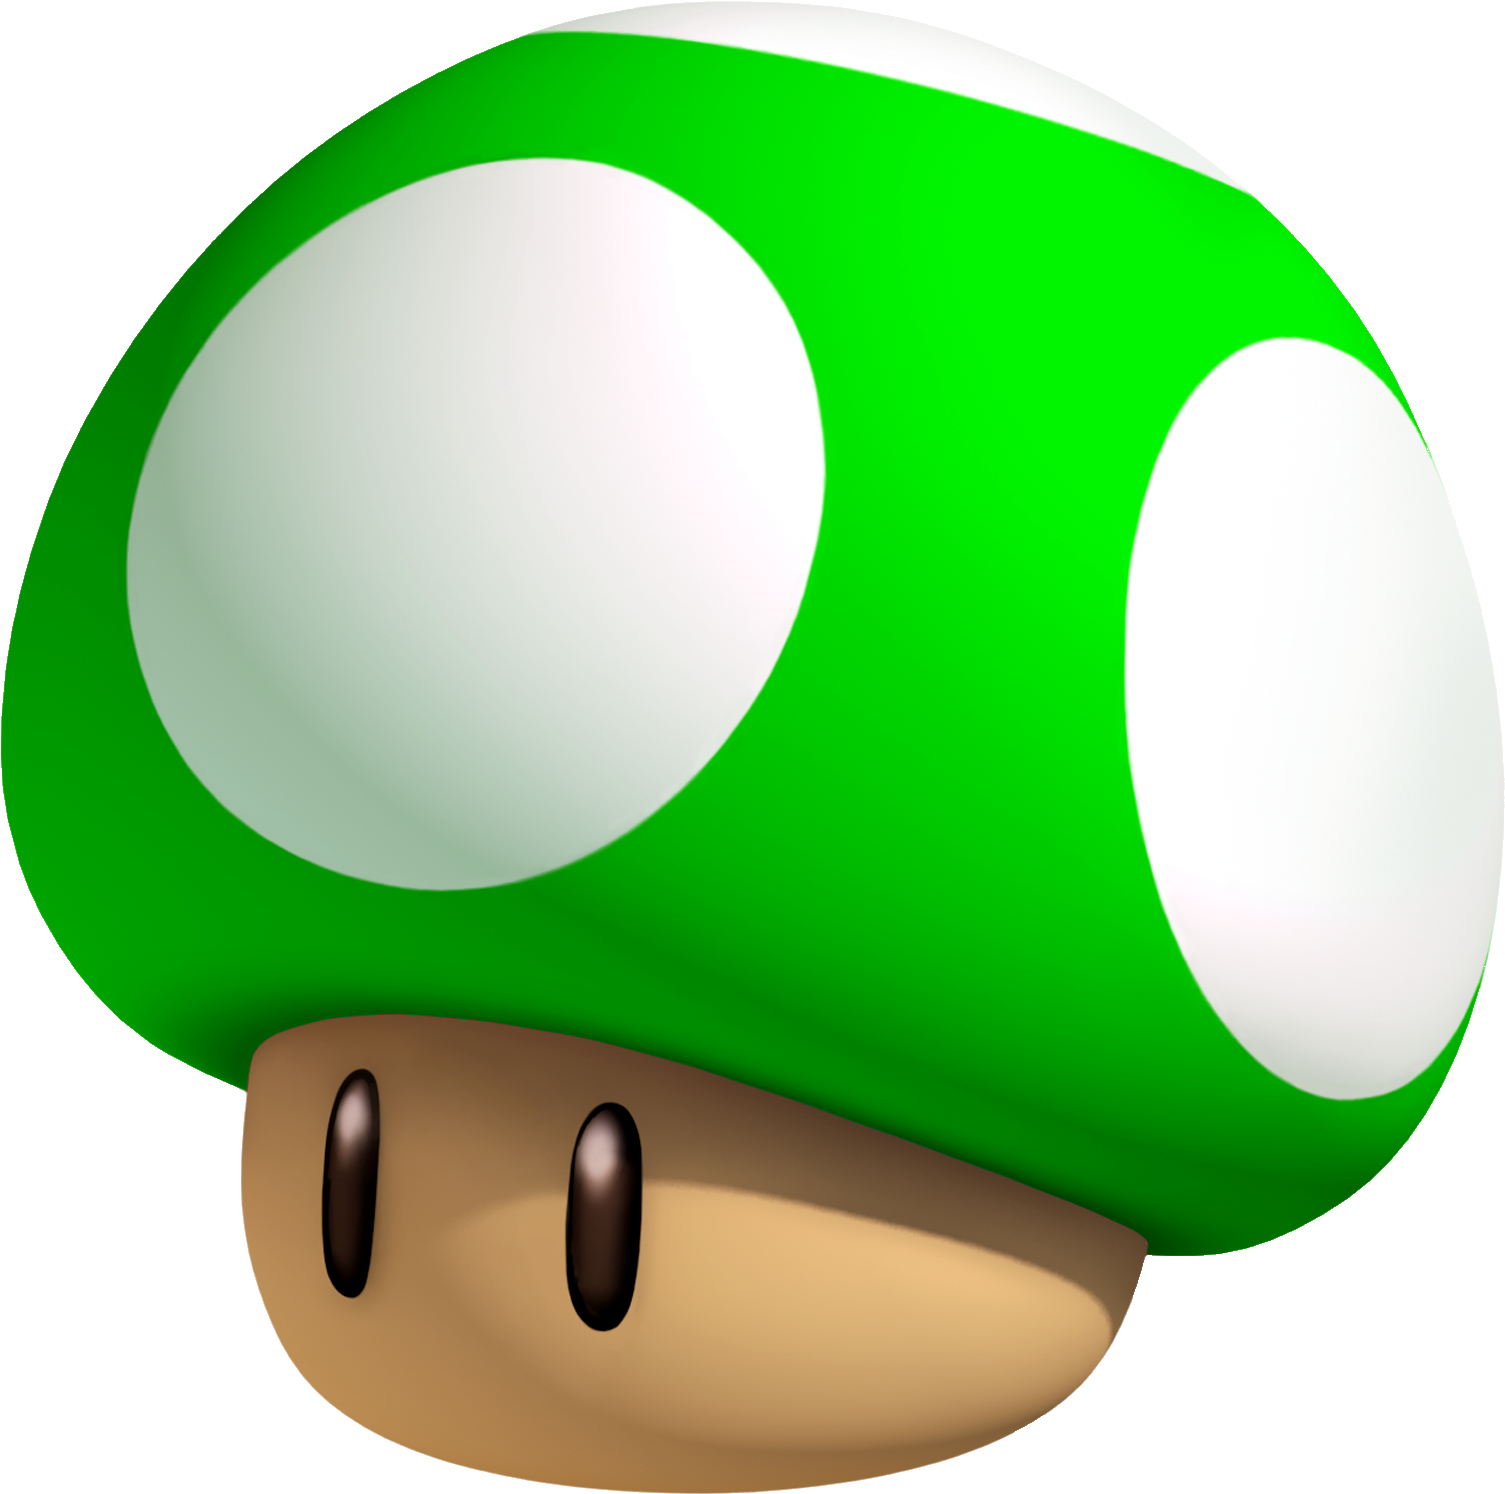 A Cartoon Mushroom With White Dots PNG